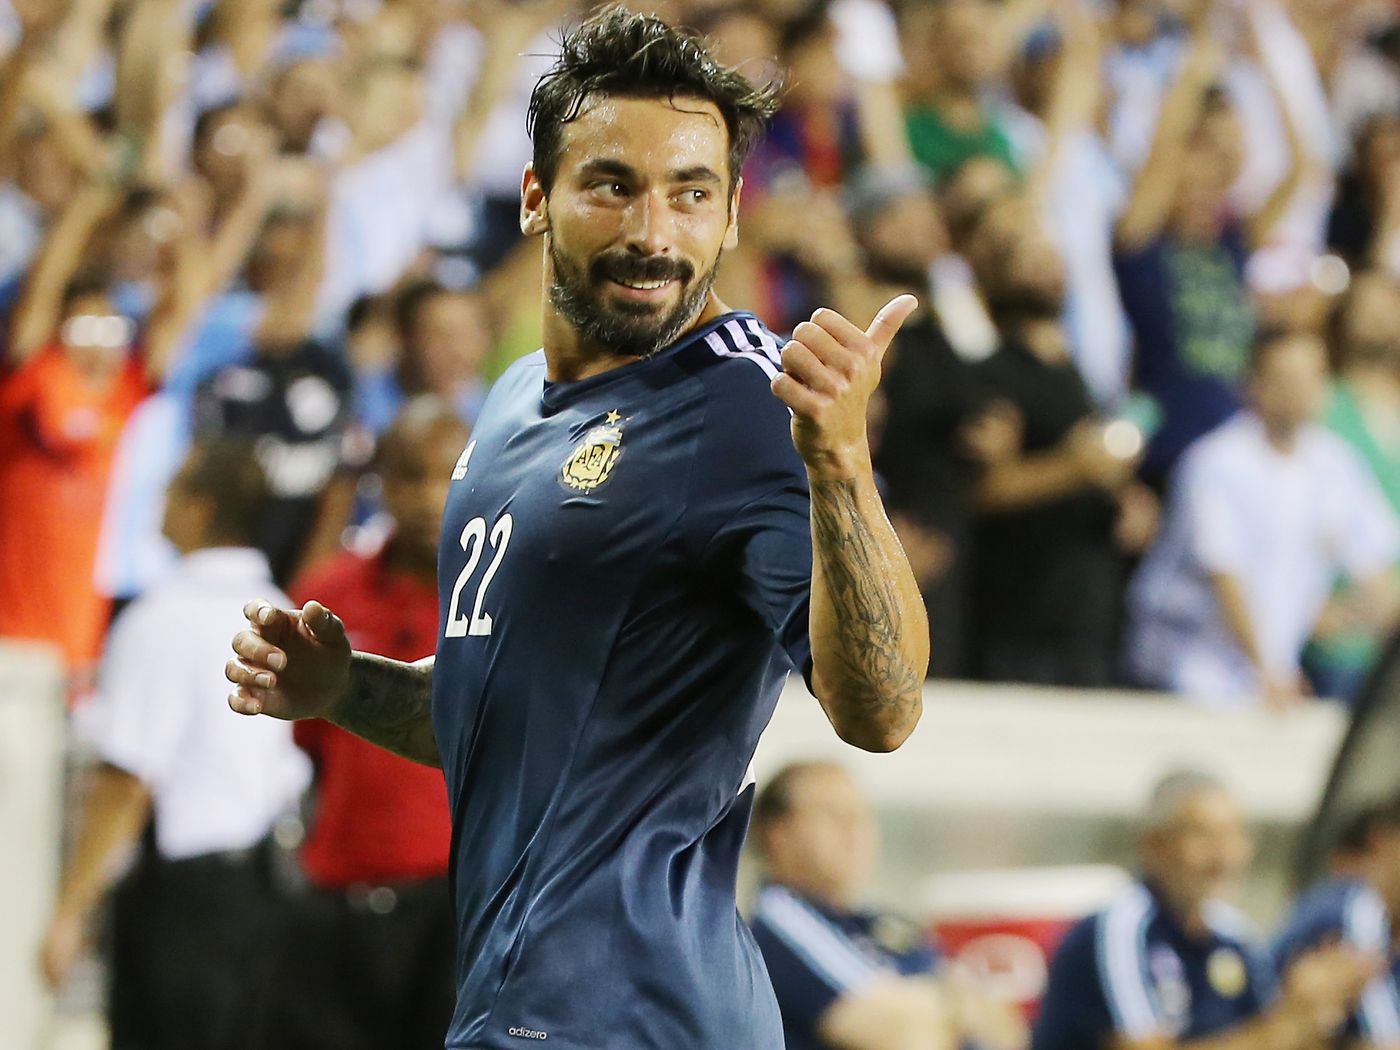 Guess What? The Ezequiel Lavezzi To Juventus Rumors Are Back In Our Lives & White & Read All Over